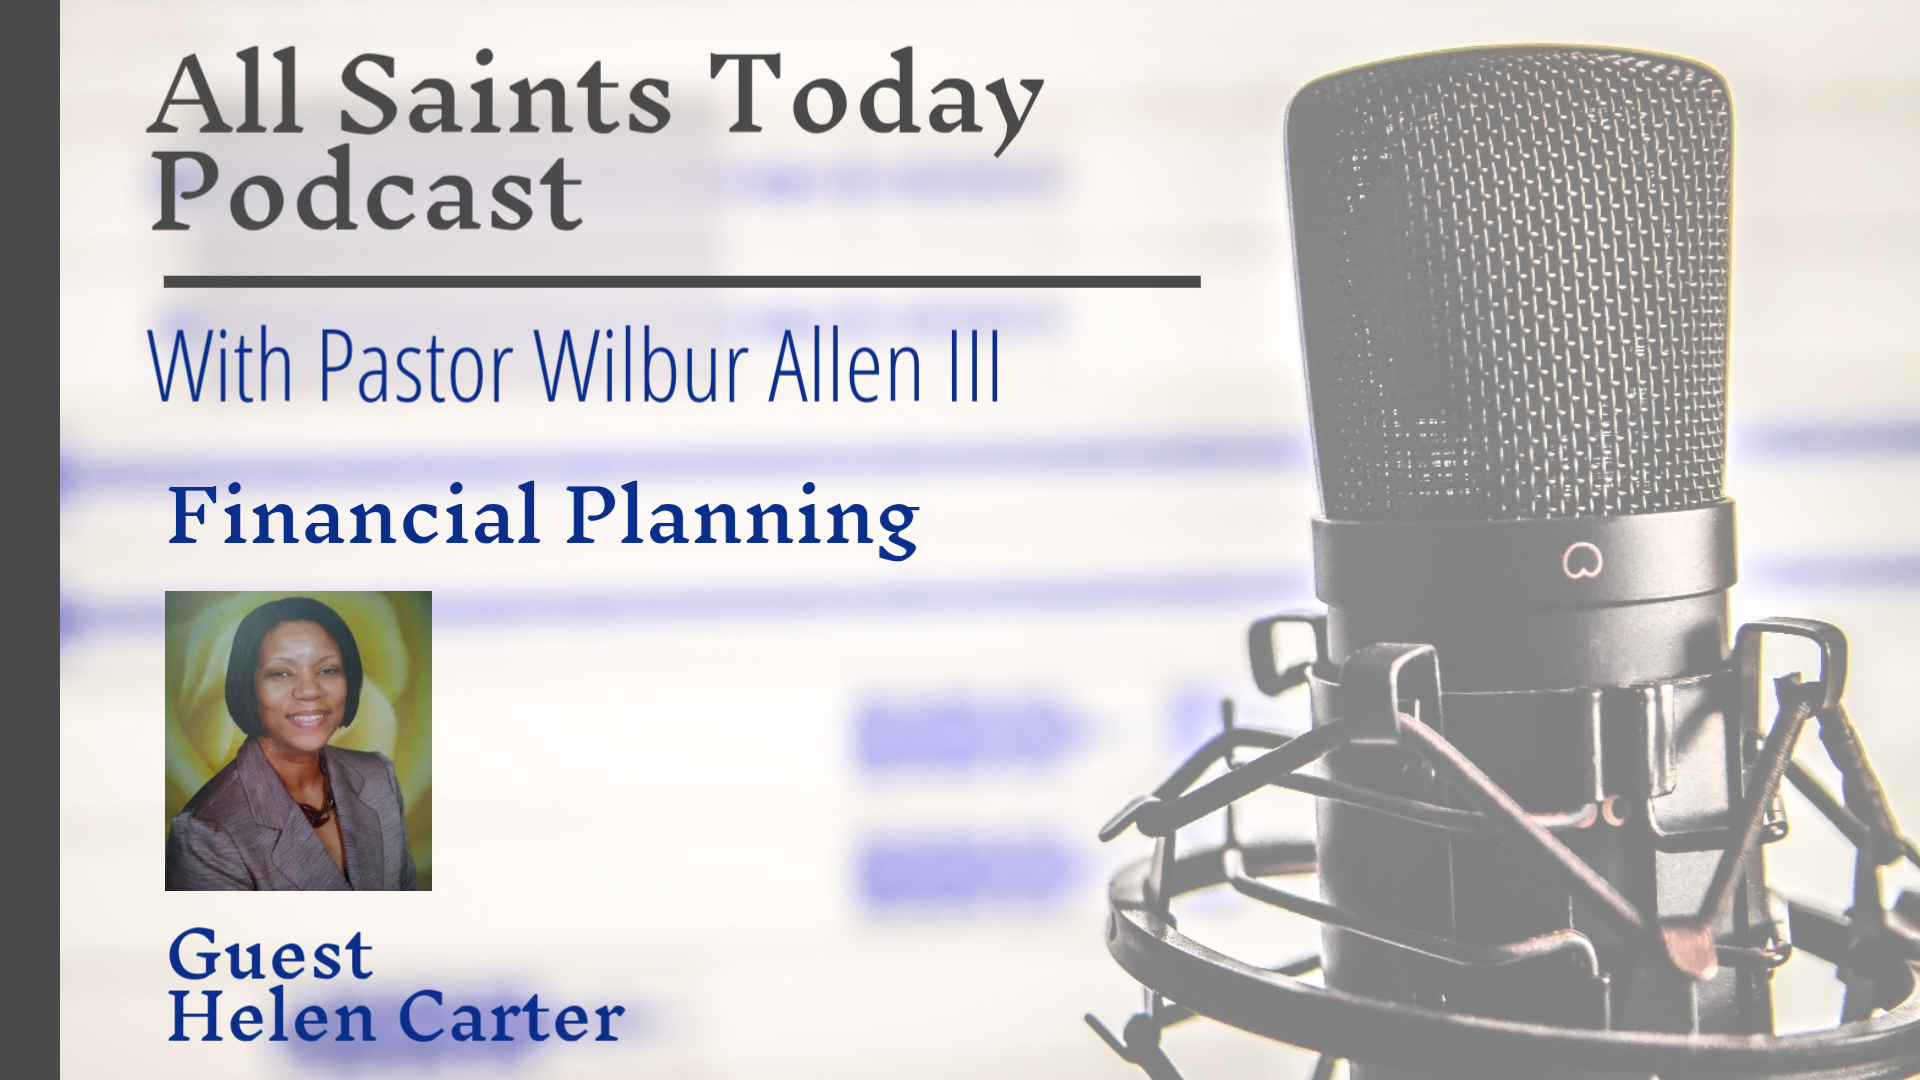 All Saints Today Podcast - Financial Planning